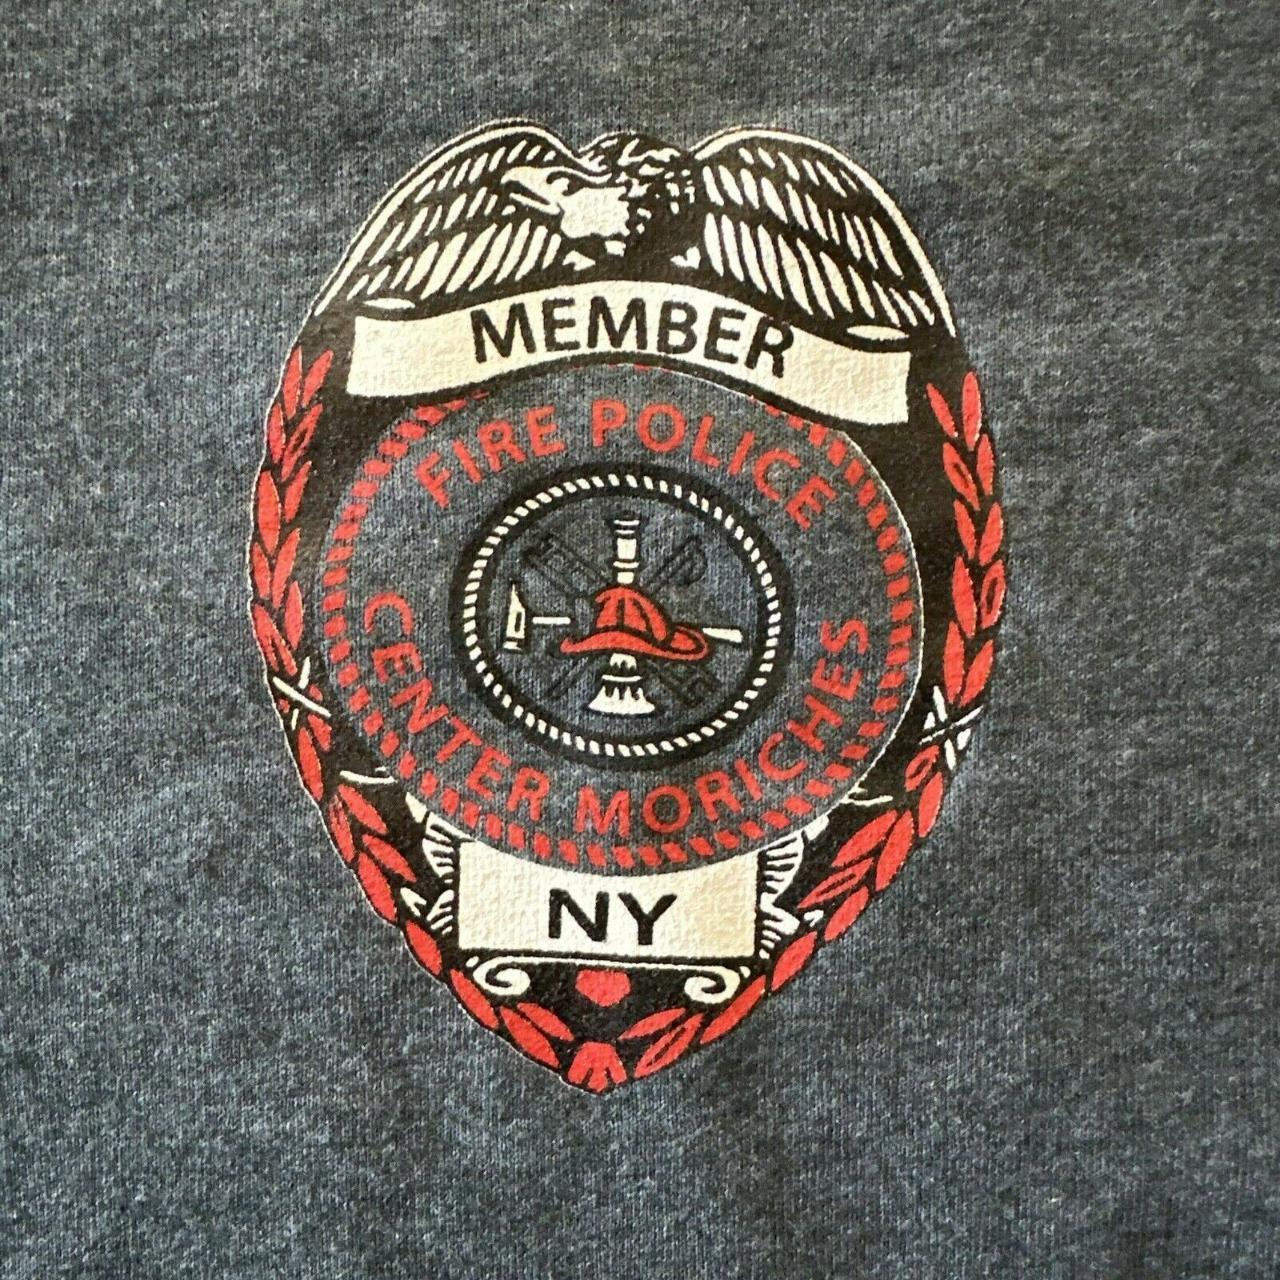 Show your support for the Center Moriches NY Fire... - Depop